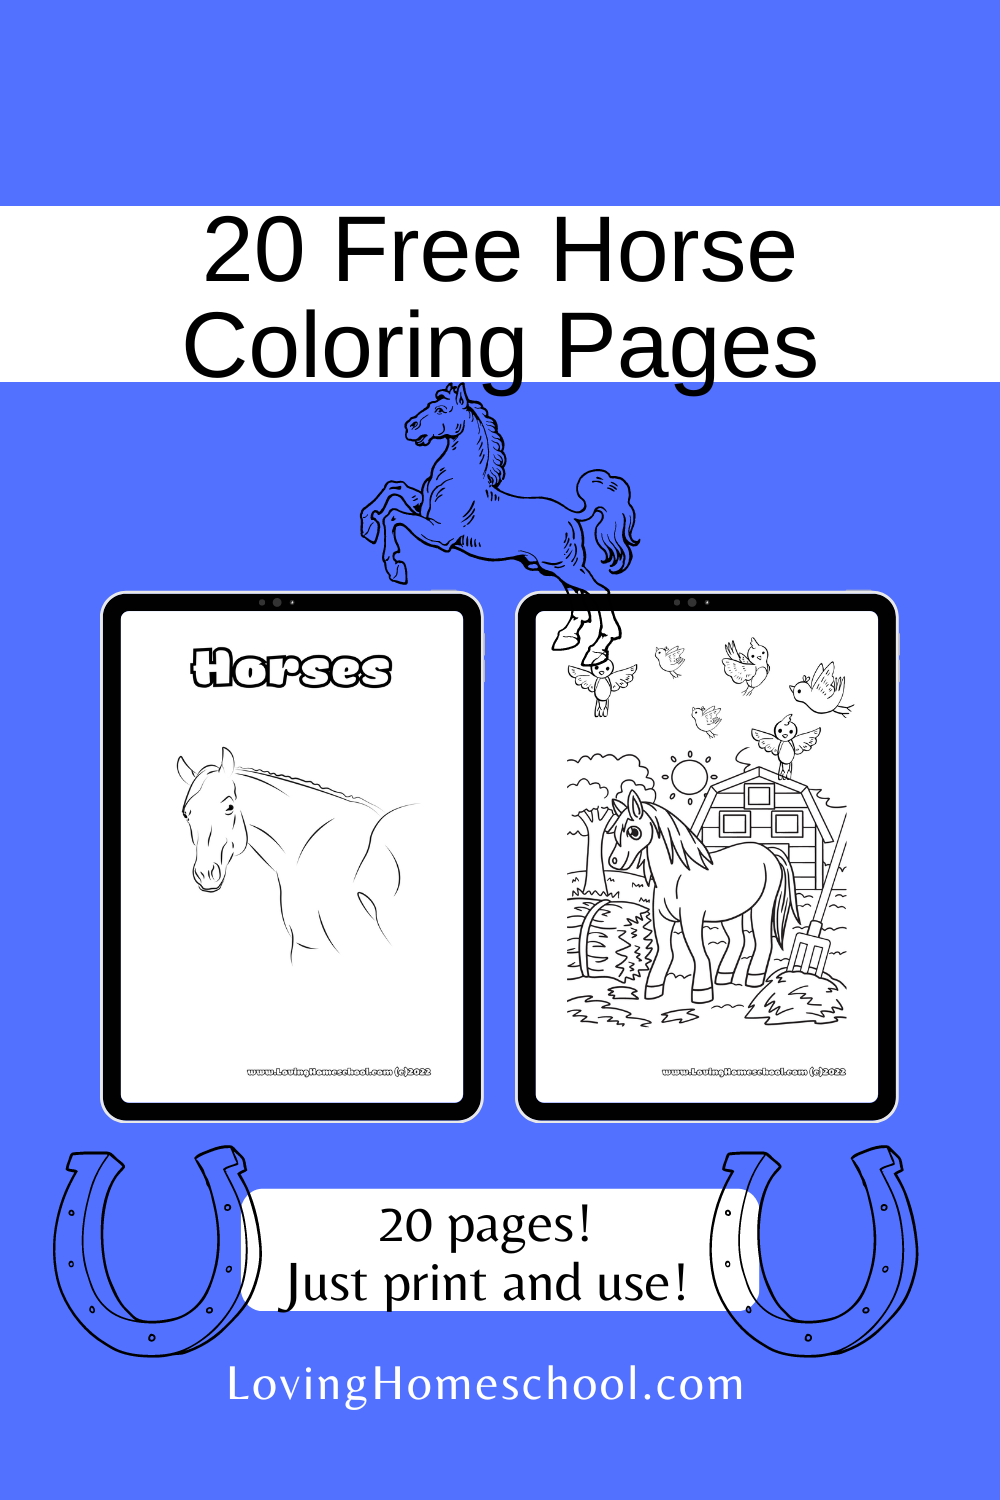 20 Free Horse Coloring Pages Pinterest Pin